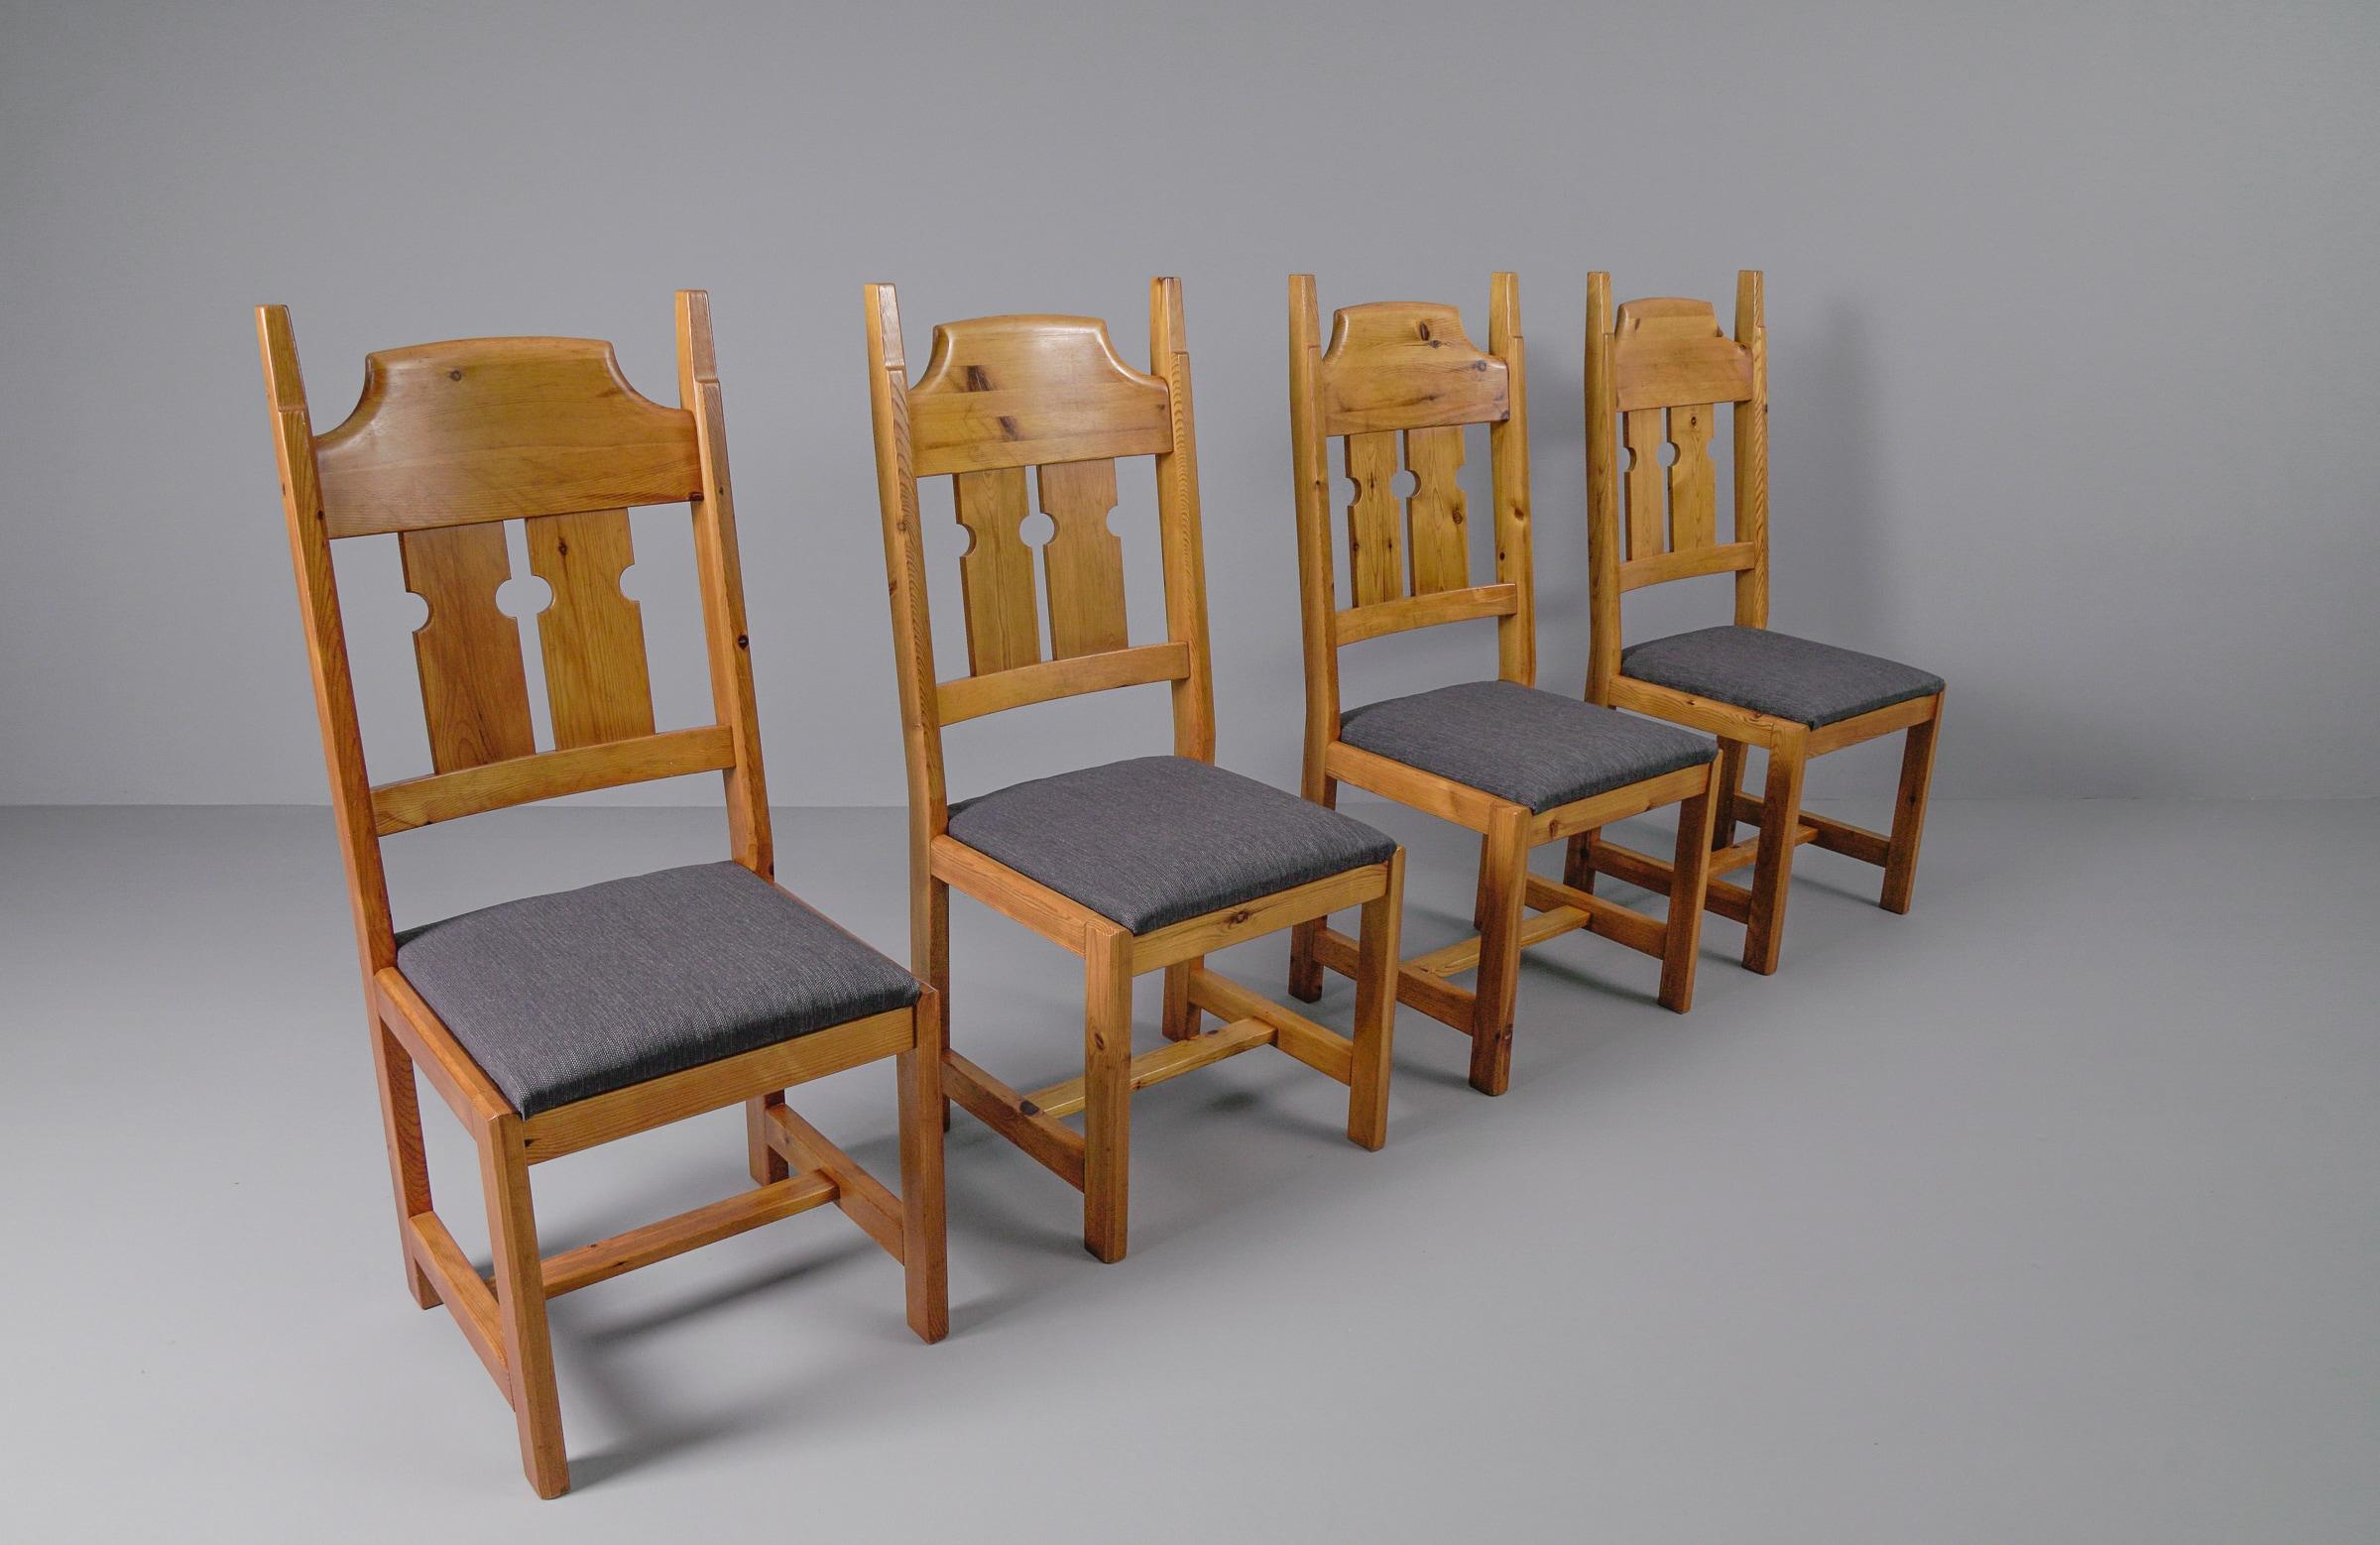  Set of 4 Swedish Pine Chairs by Gilbert Marklund for Furusnickarn AB, 1970s In Good Condition For Sale In Nürnberg, Bayern